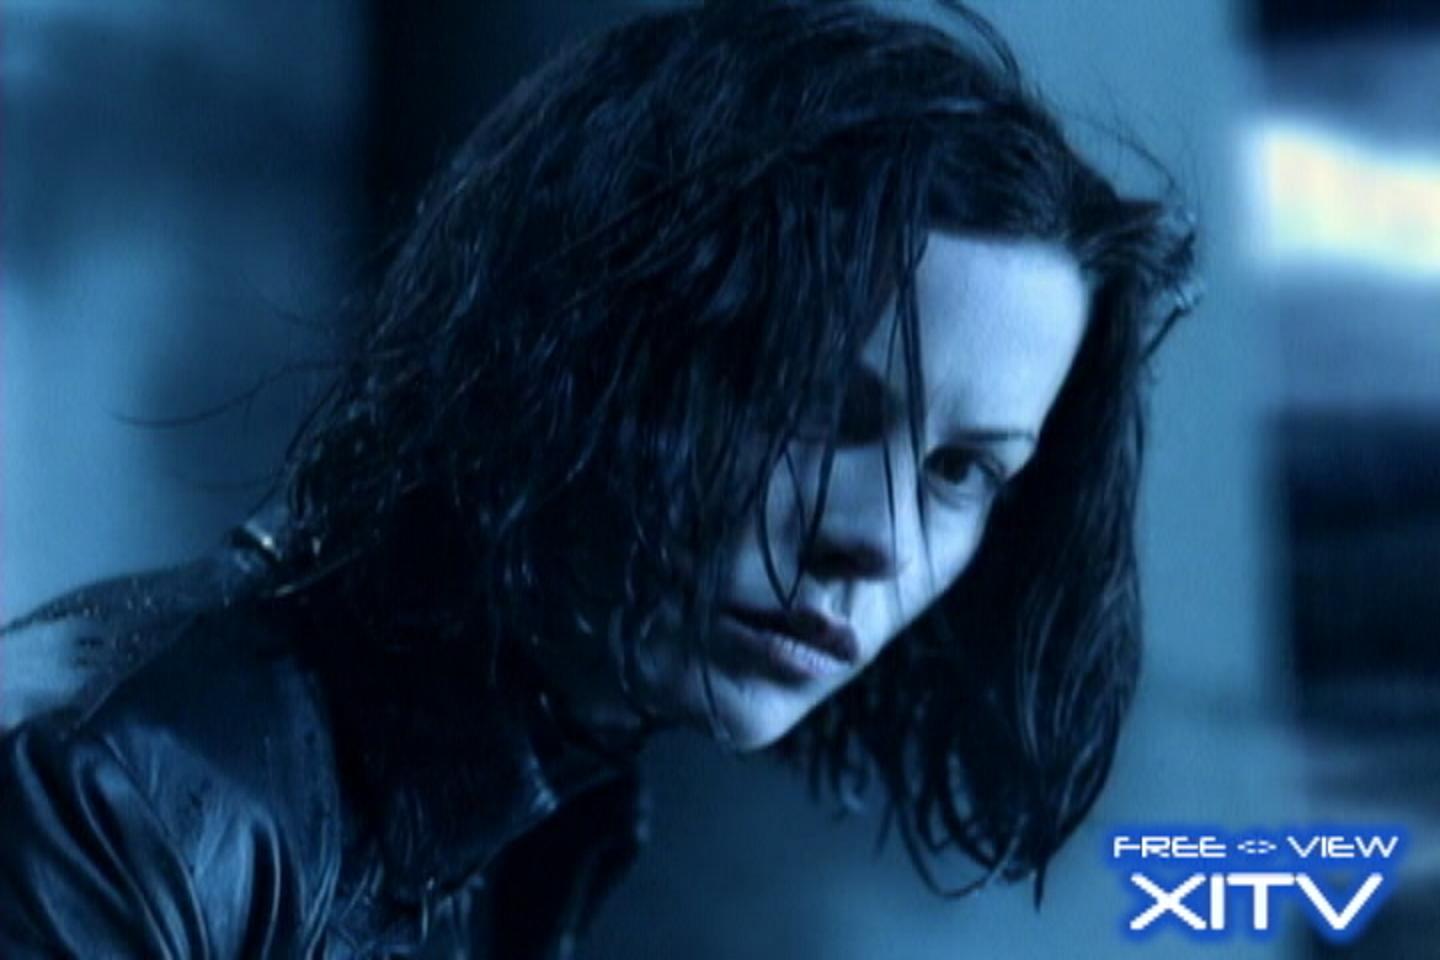 XITV FREE <> VIEW Underworld! Starring Kate Beckinsale! XITV Is Must See TV! 